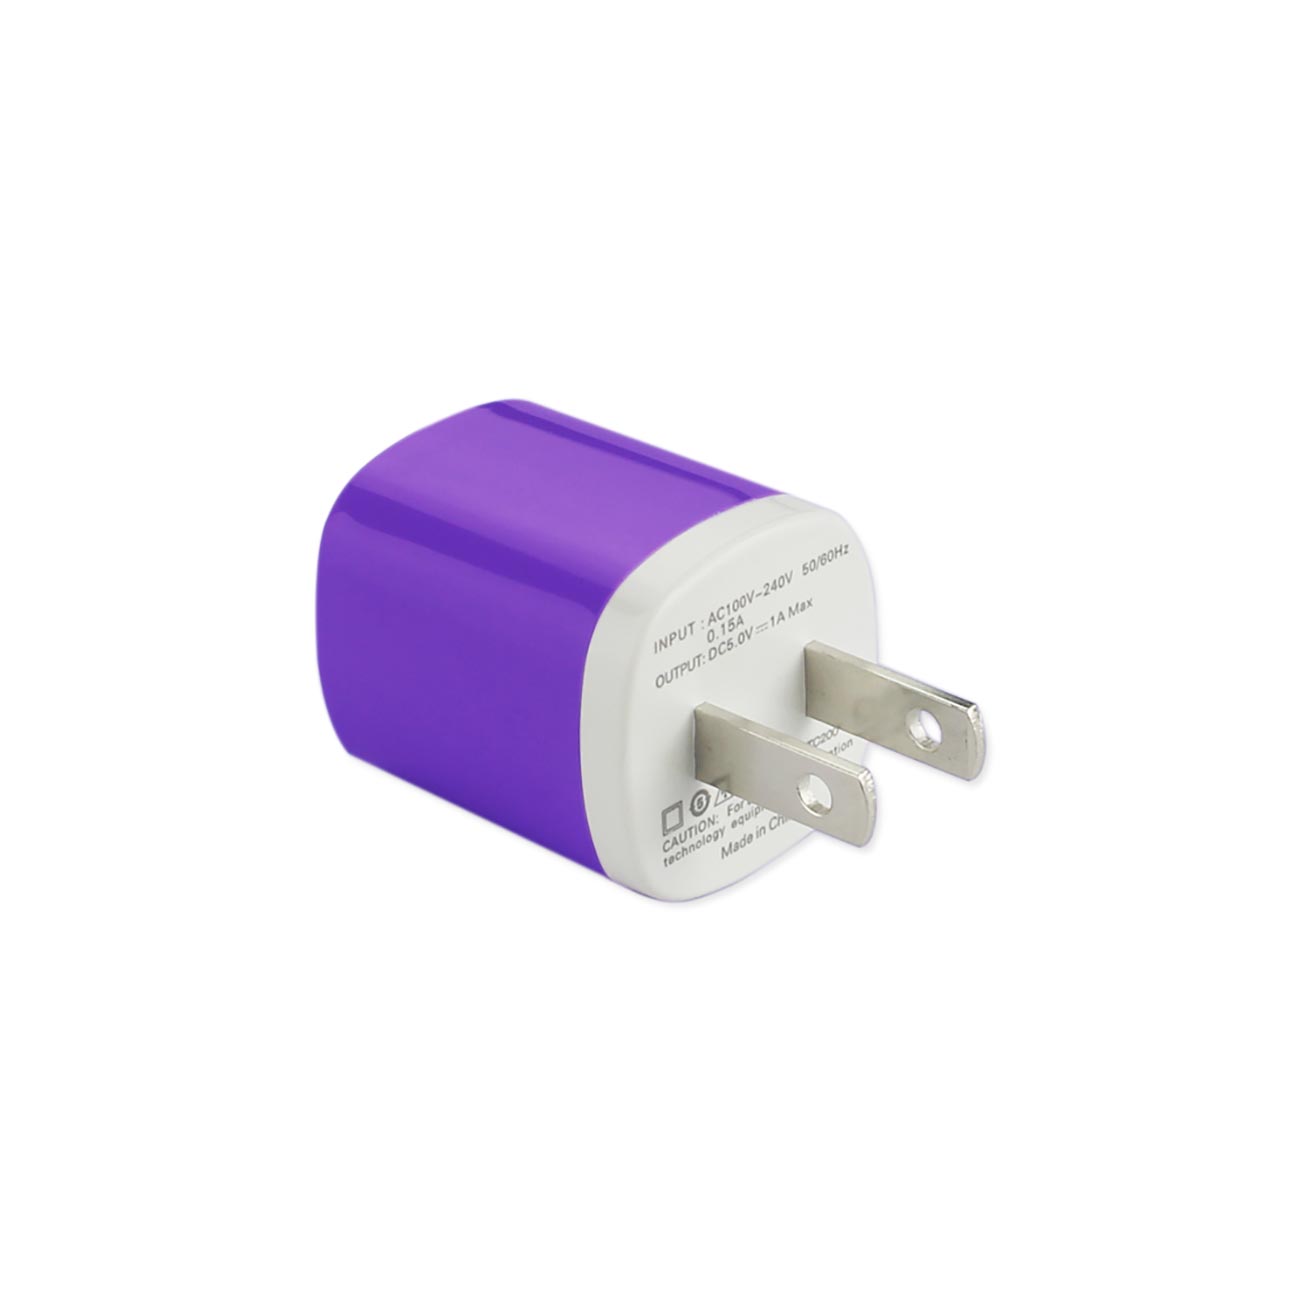 Charger Adapter USB 1 Amp Purple Color-